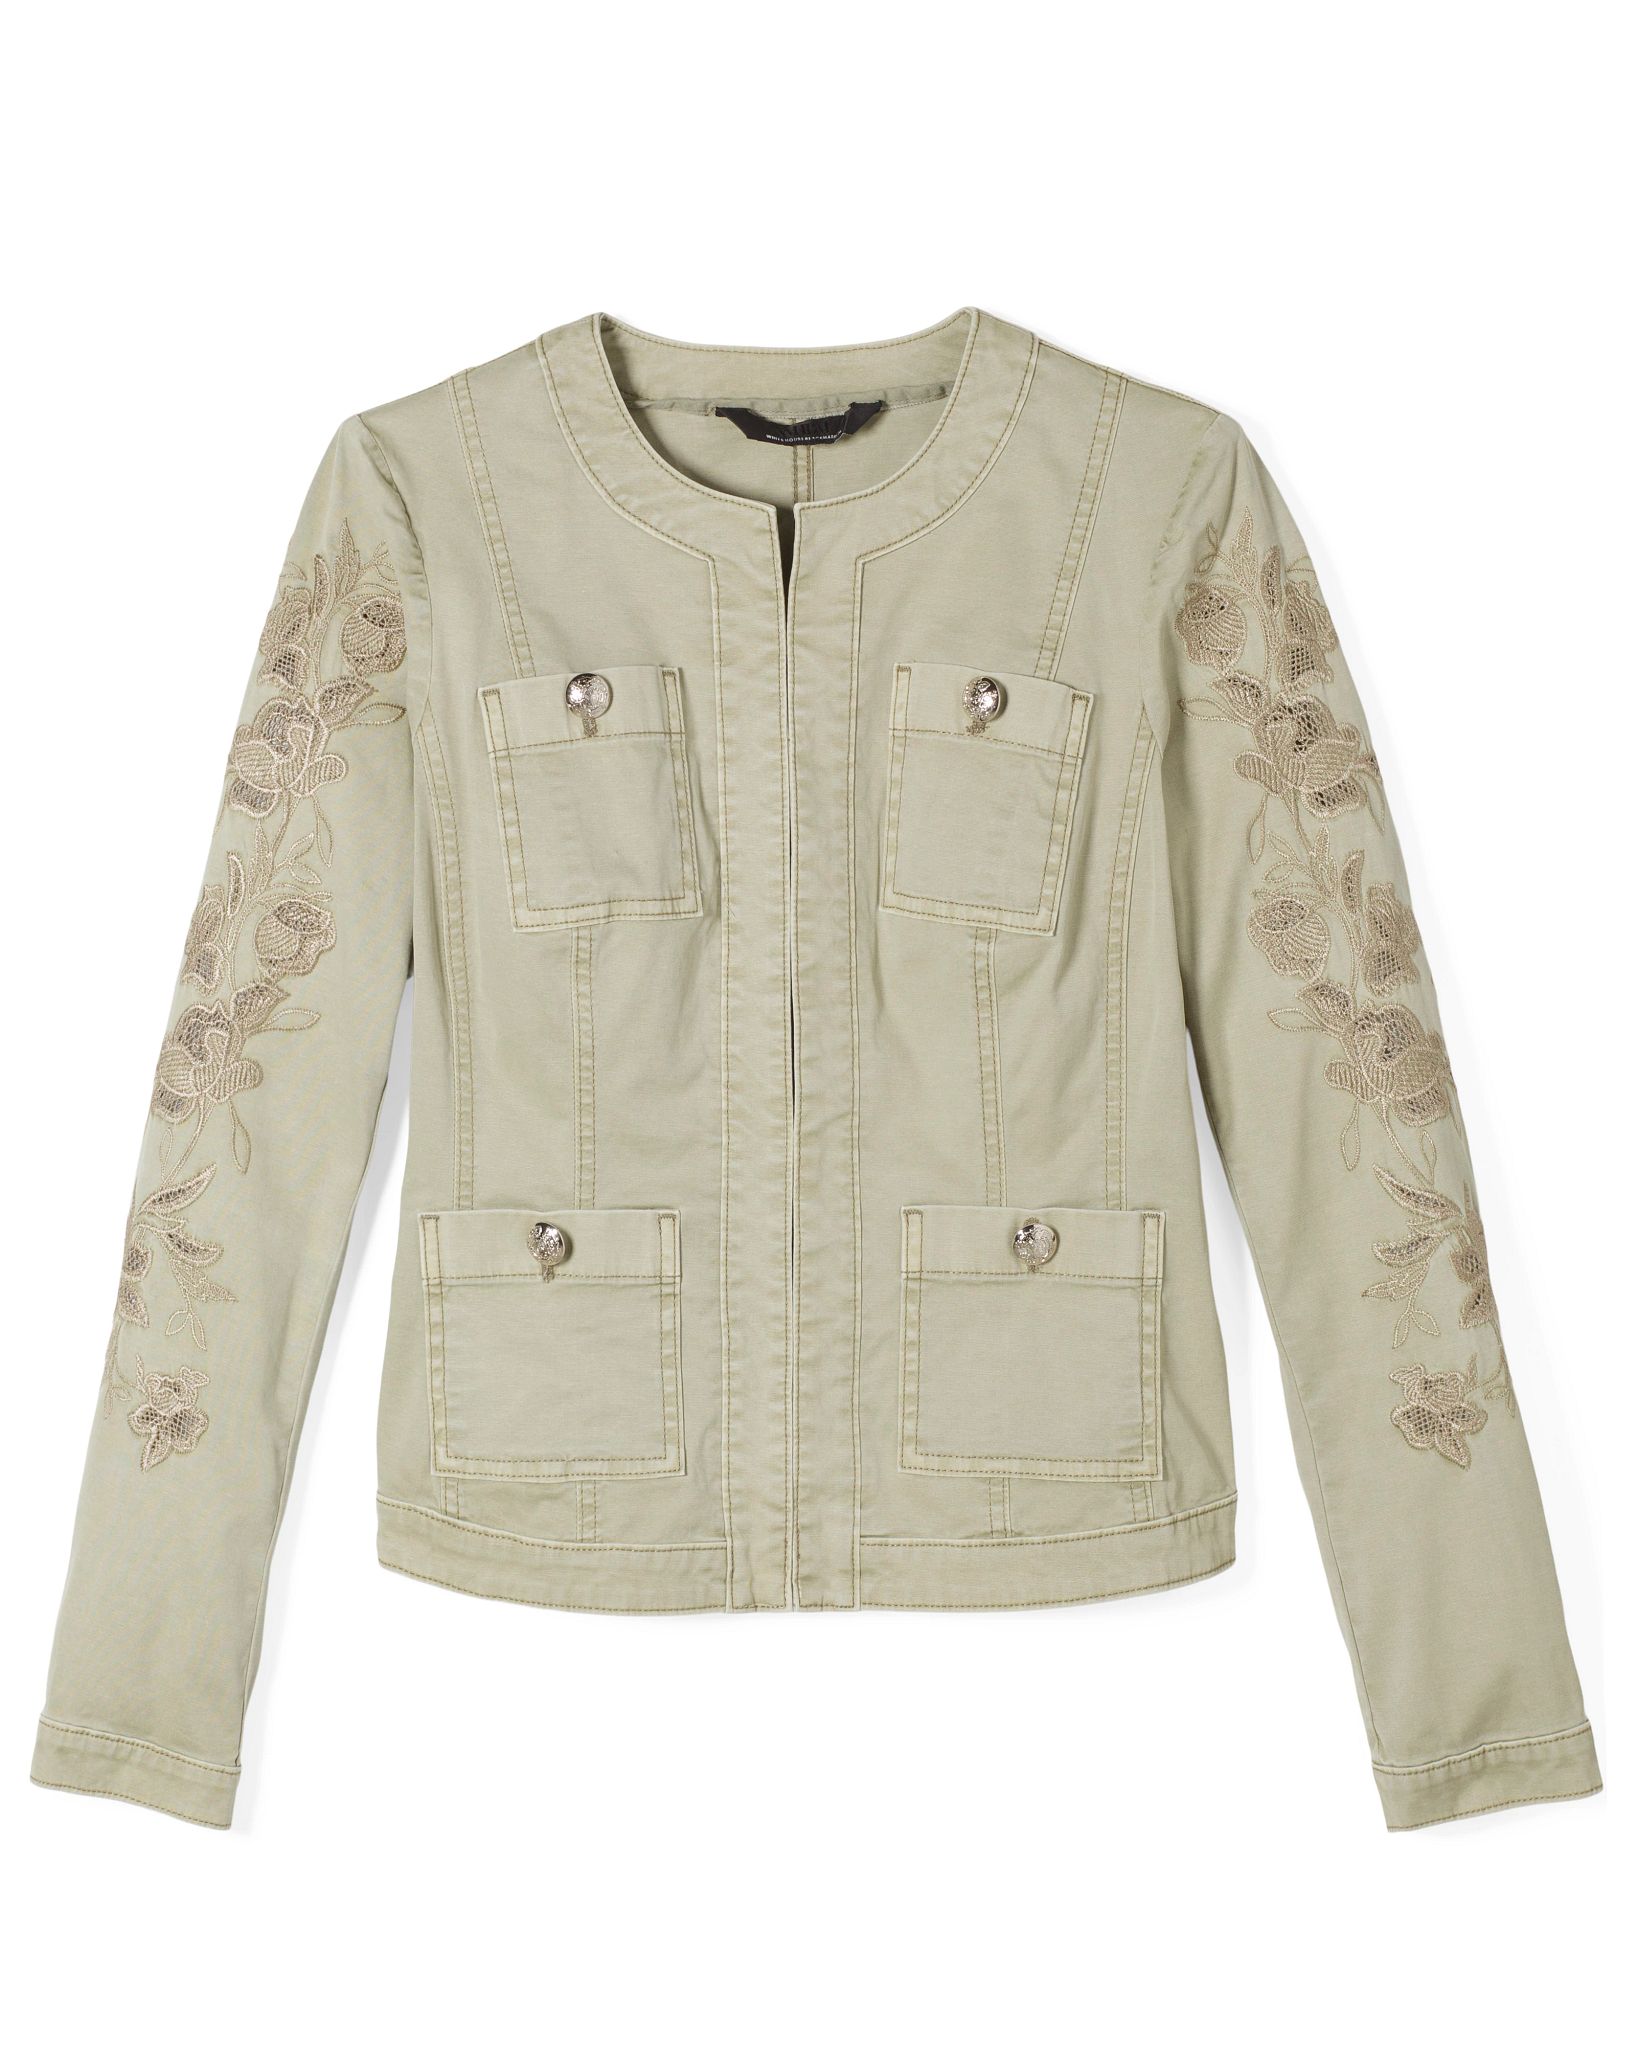 Cutwork WHBM® Stylist Pret Jacket click to view larger image.